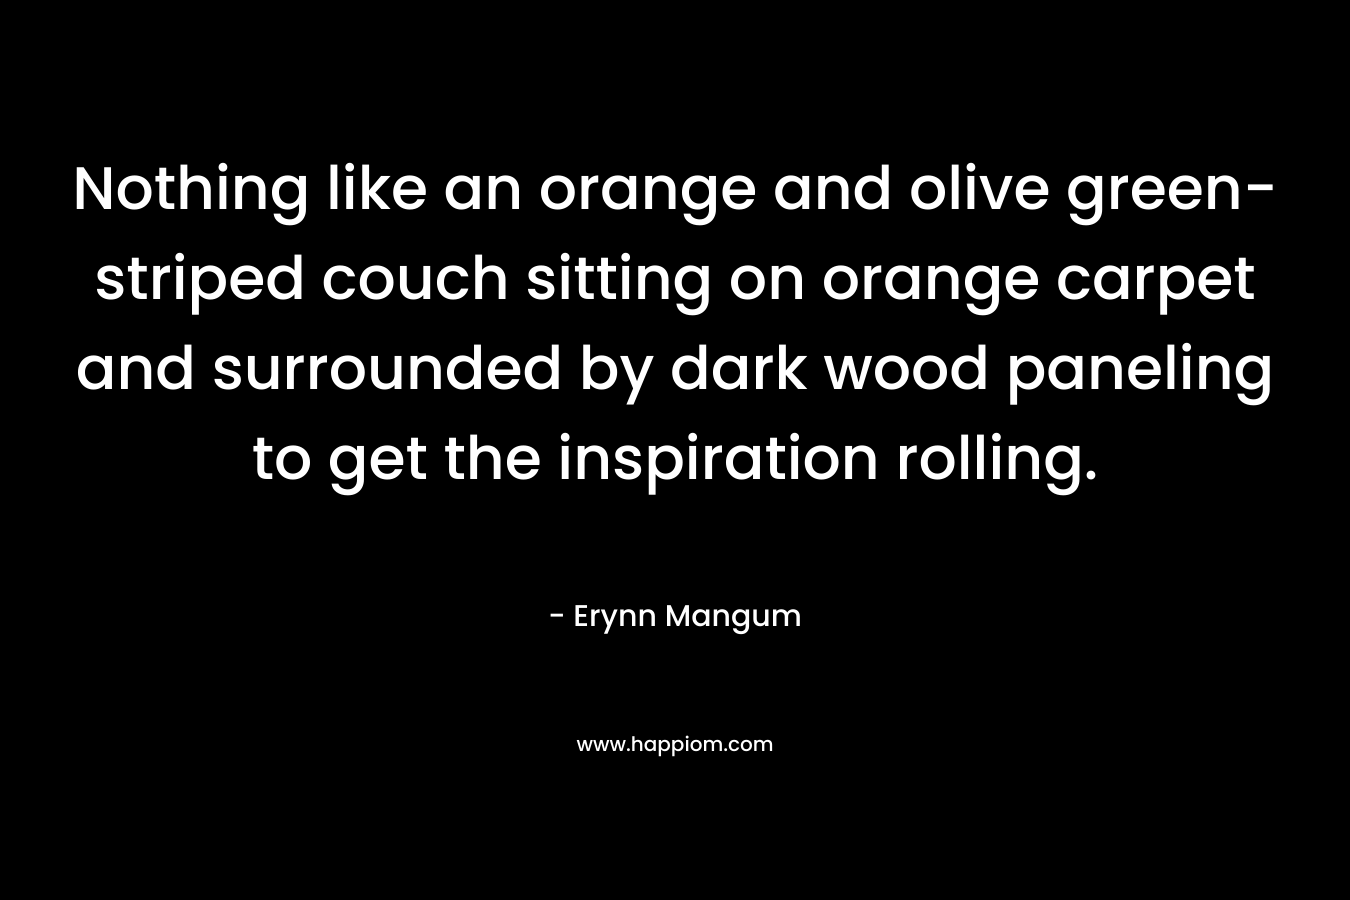 Nothing like an orange and olive green-striped couch sitting on orange carpet and surrounded by dark wood paneling to get the inspiration rolling.